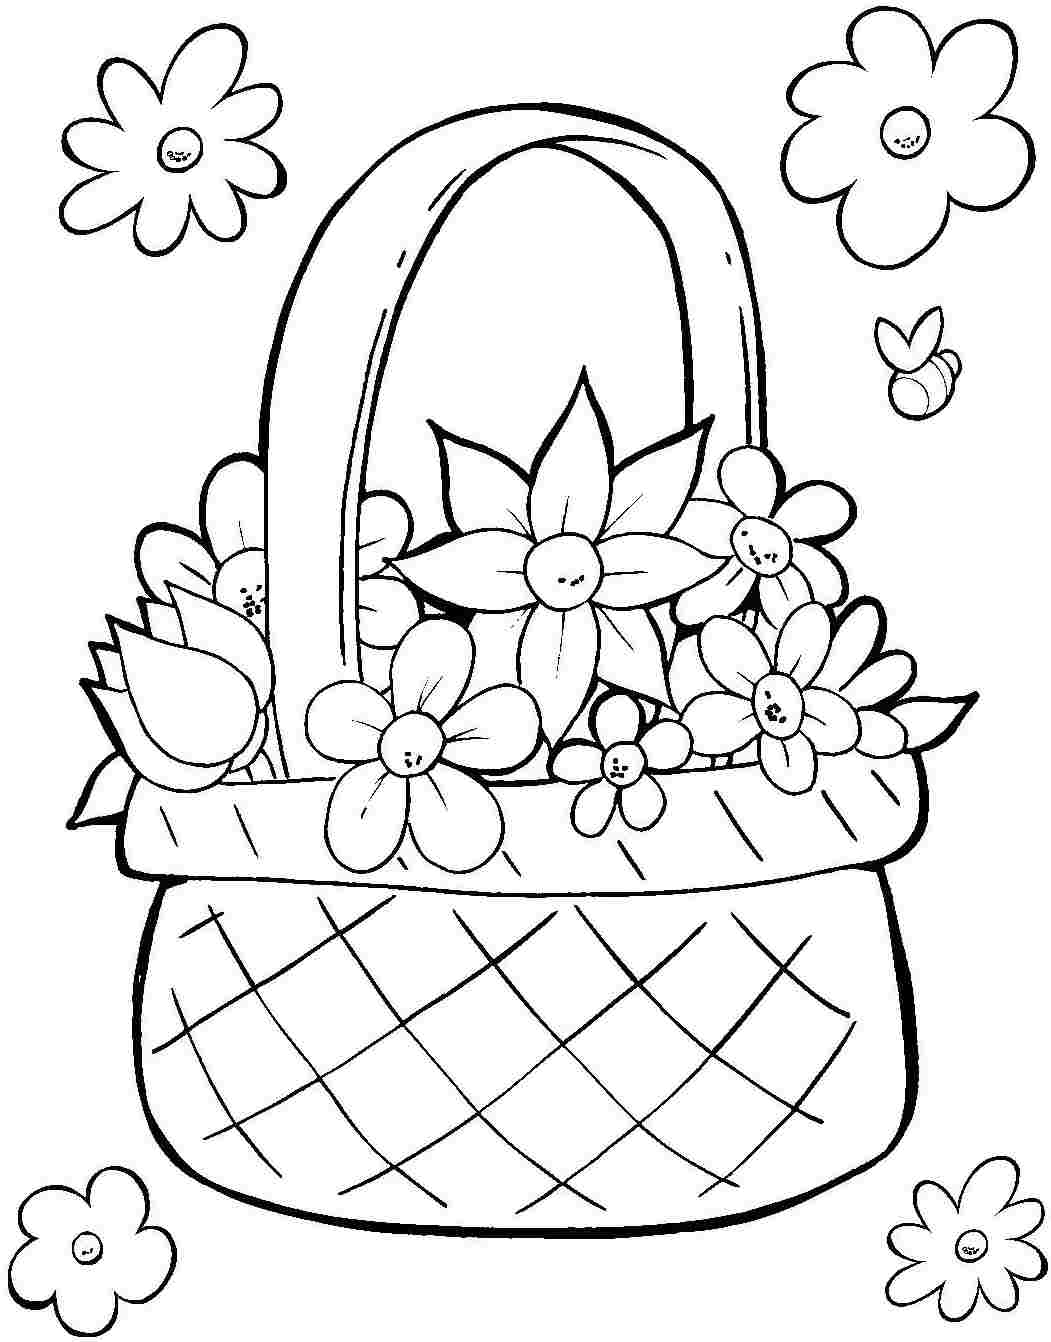 Easter Basket Printable Coloring Pages at GetColorings.com | Free